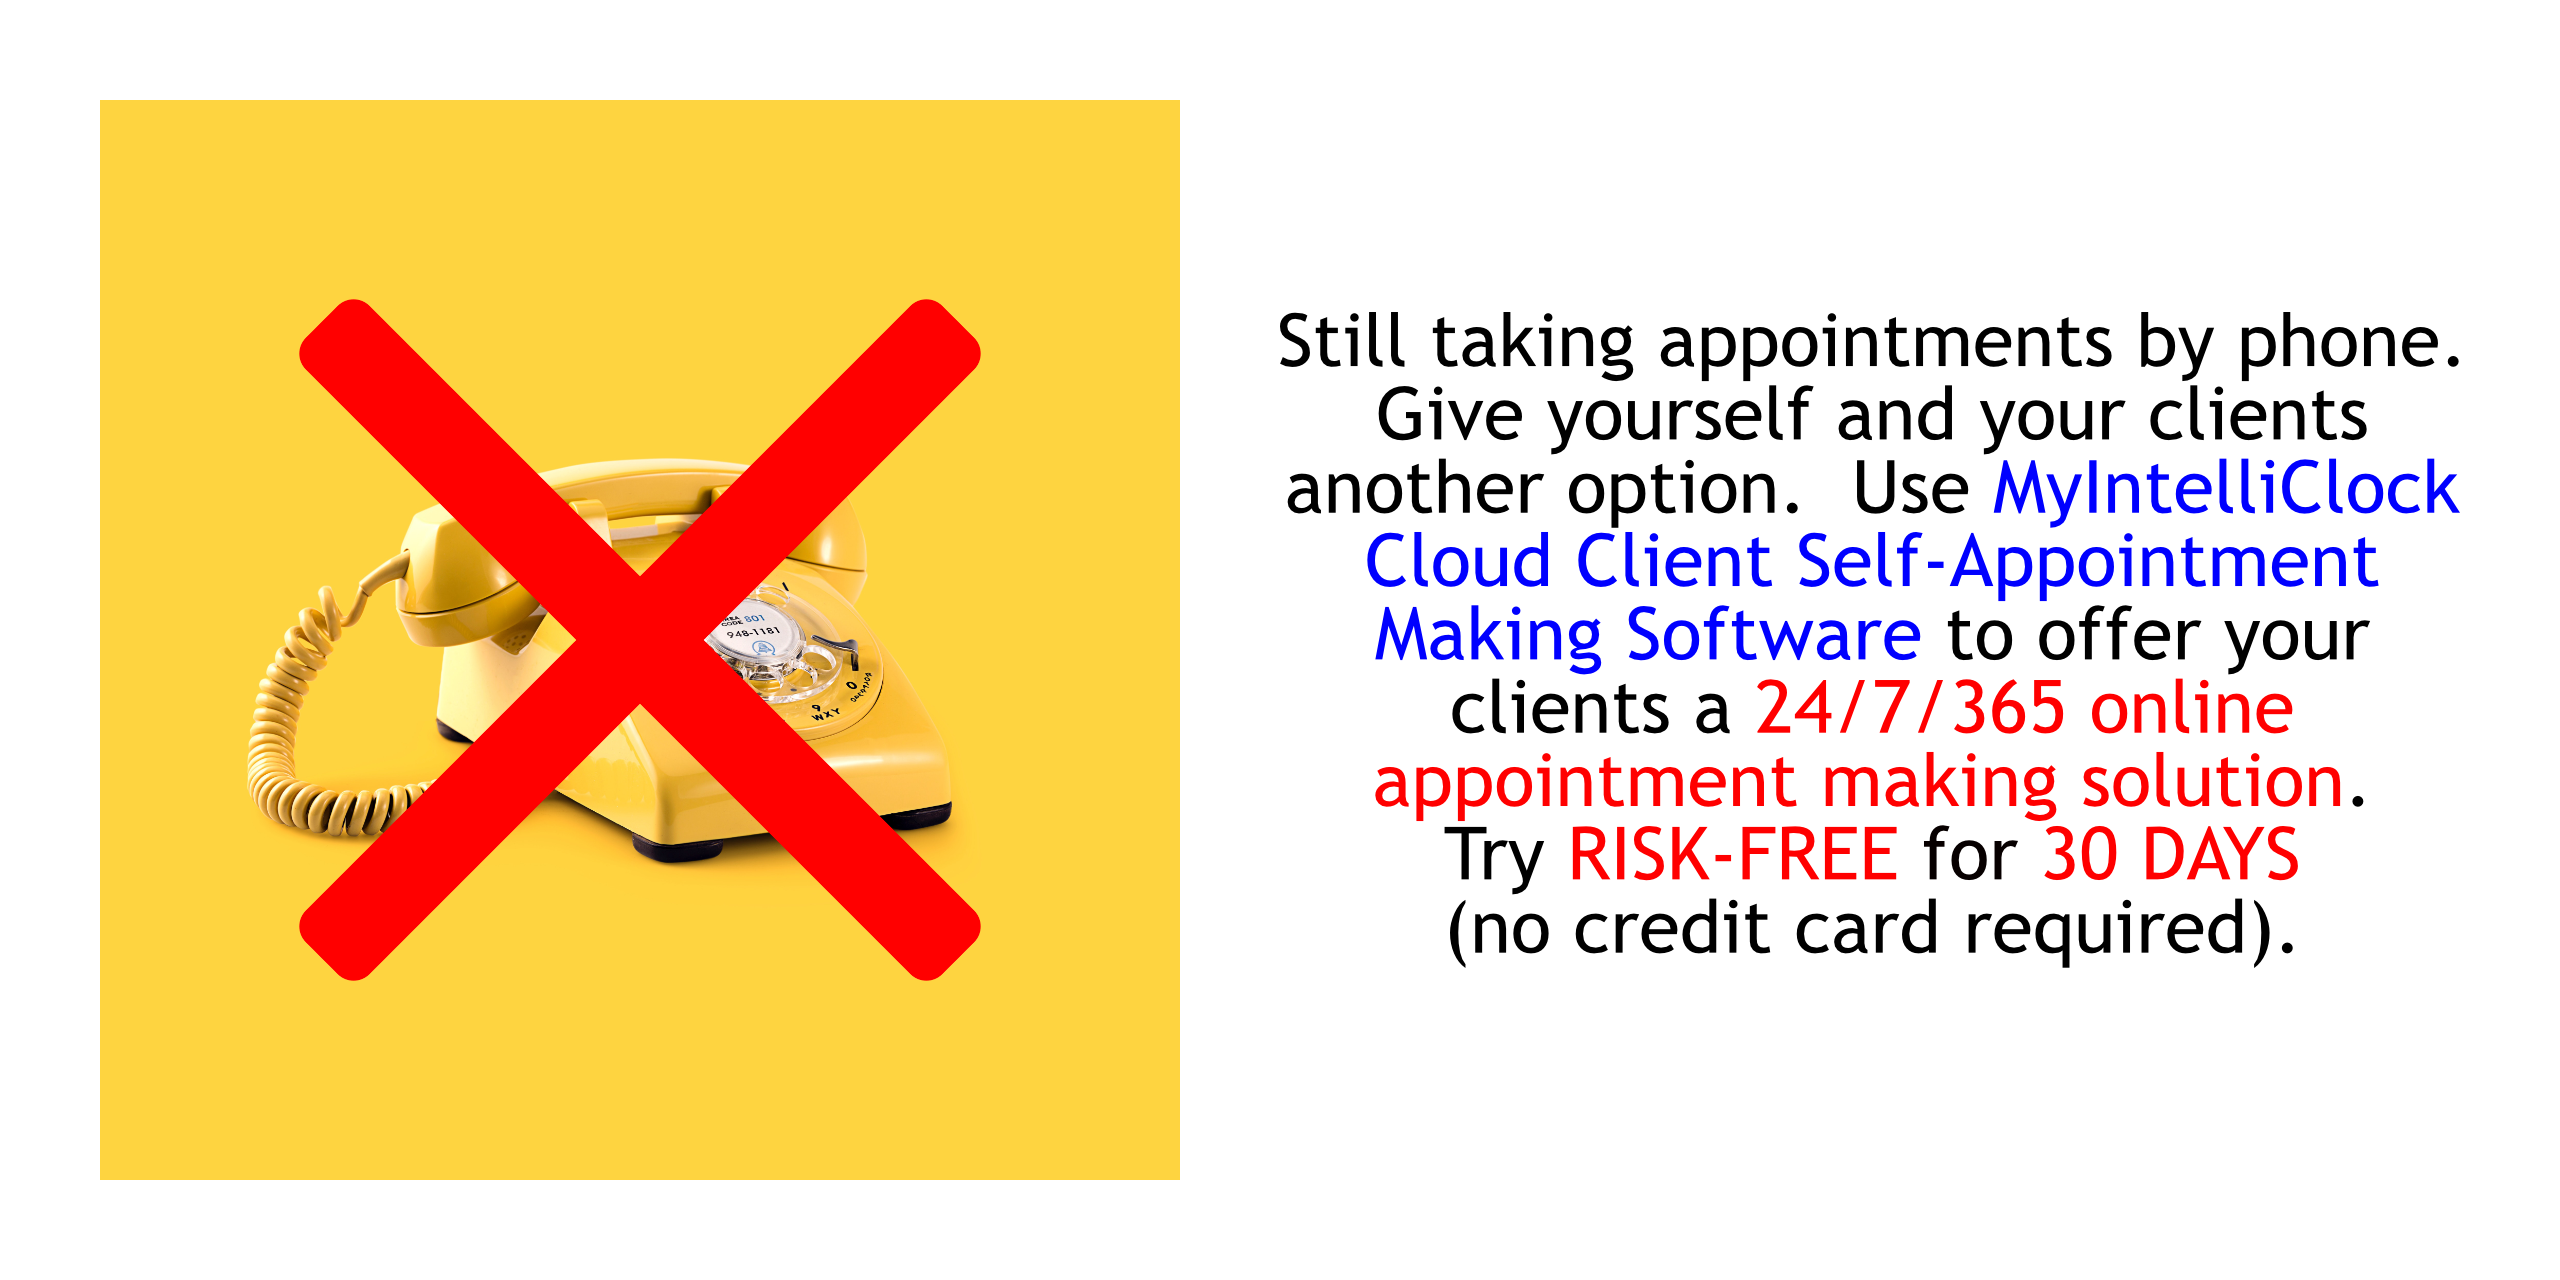 Still taking appointments by phone.  Give yourself and your clients another option.  Use MyIntelliClock Cloud Client Self-Appointment Making Software to offer your clients a 24/7/365 online appointment making solution.  Try RISK-FREE FOR THIRTY (30) DAYS (NO CREDIT CARD REQUIRED; CANCELS AUTOMATICALLY IF YOU DO NOT SUBSCRIBE).